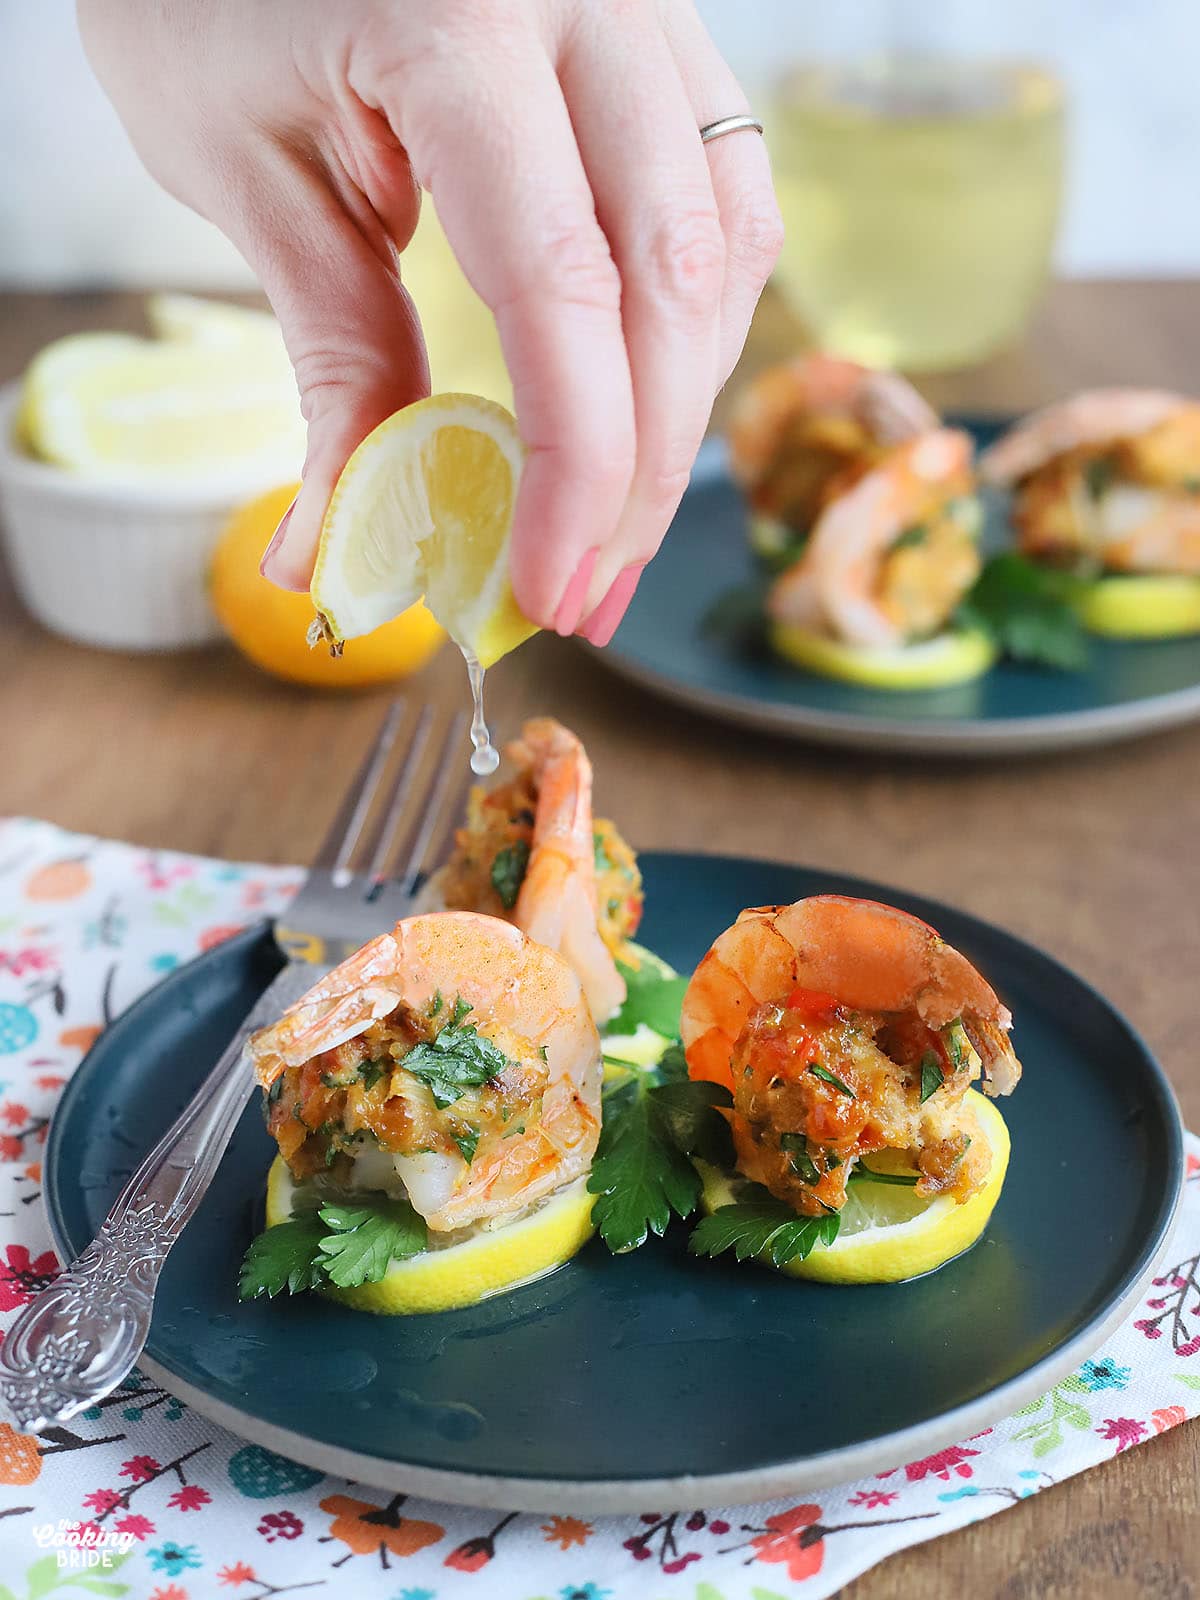 hand squeezing lemon juice over crab stuffed shrimp on a teal colored plate